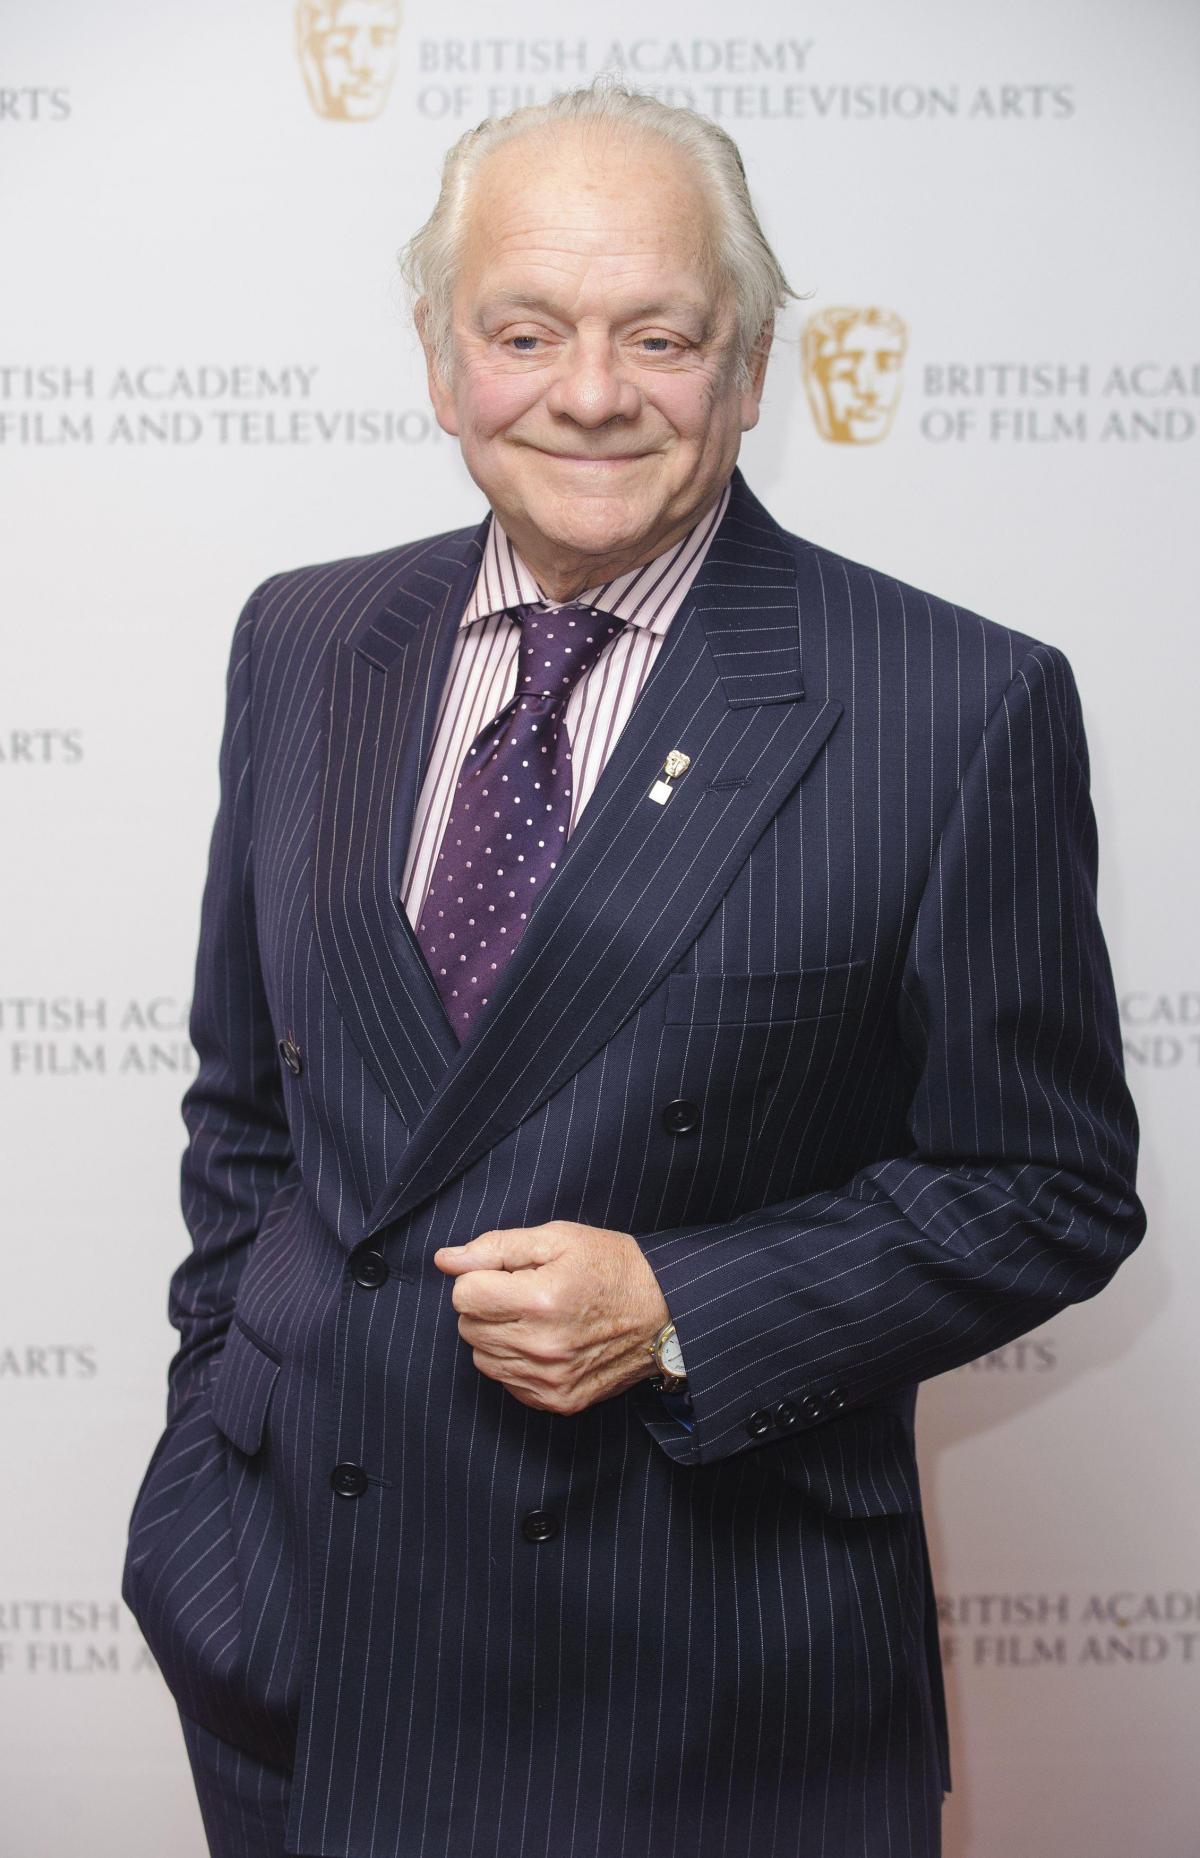 Actor Sir David Jason: "I've done my fair share of waiting on tables in restaurants, cleaning cars, whatever. I was even an electrician at one time, and I've done my fair share of decorating too…..  but slowly my fortunes changed."